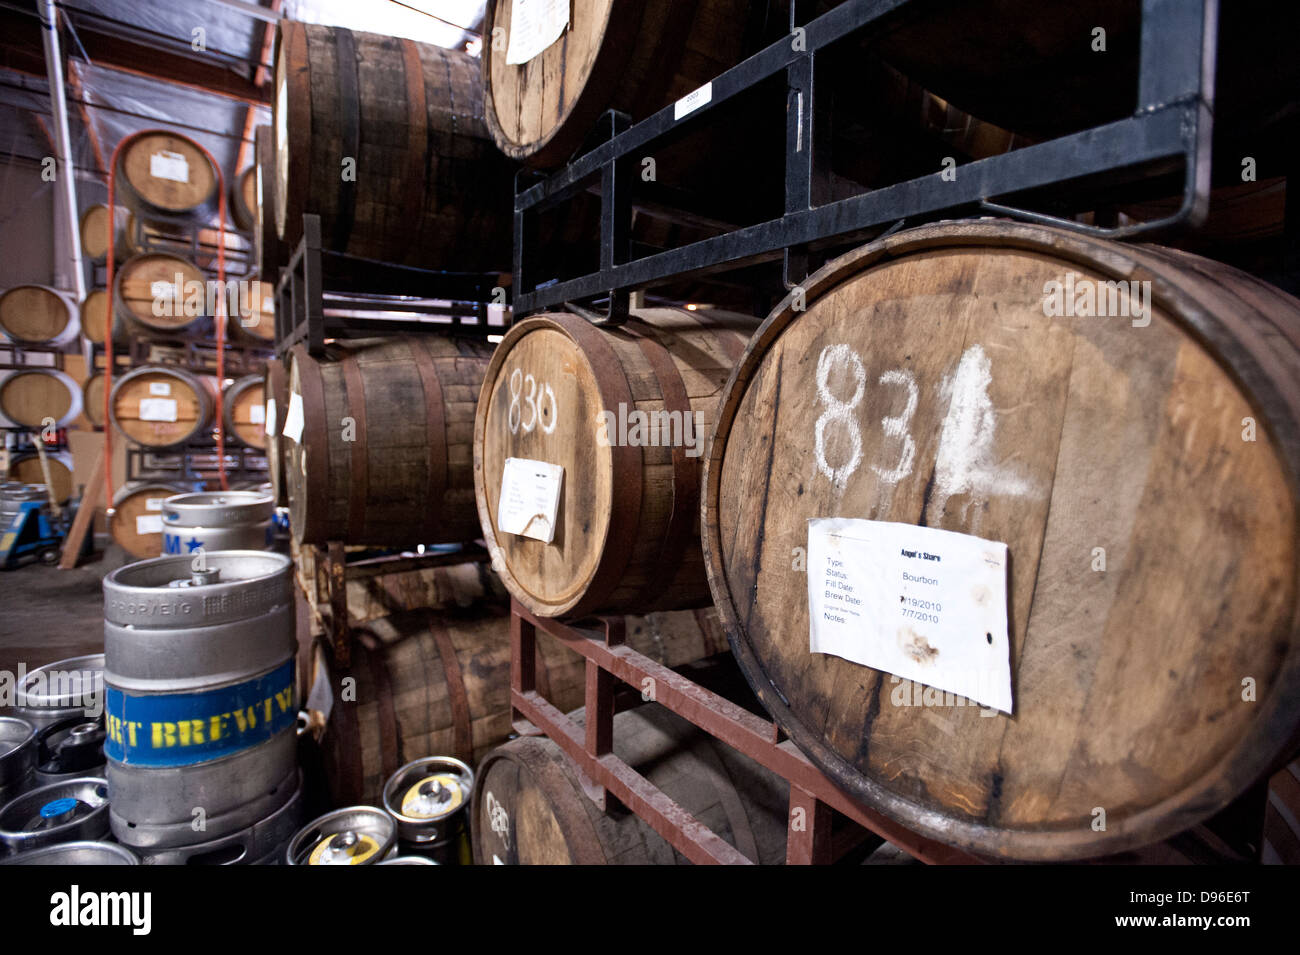 Lost Abbey Brewery, San Marcos, California, United States of America Stock Photo